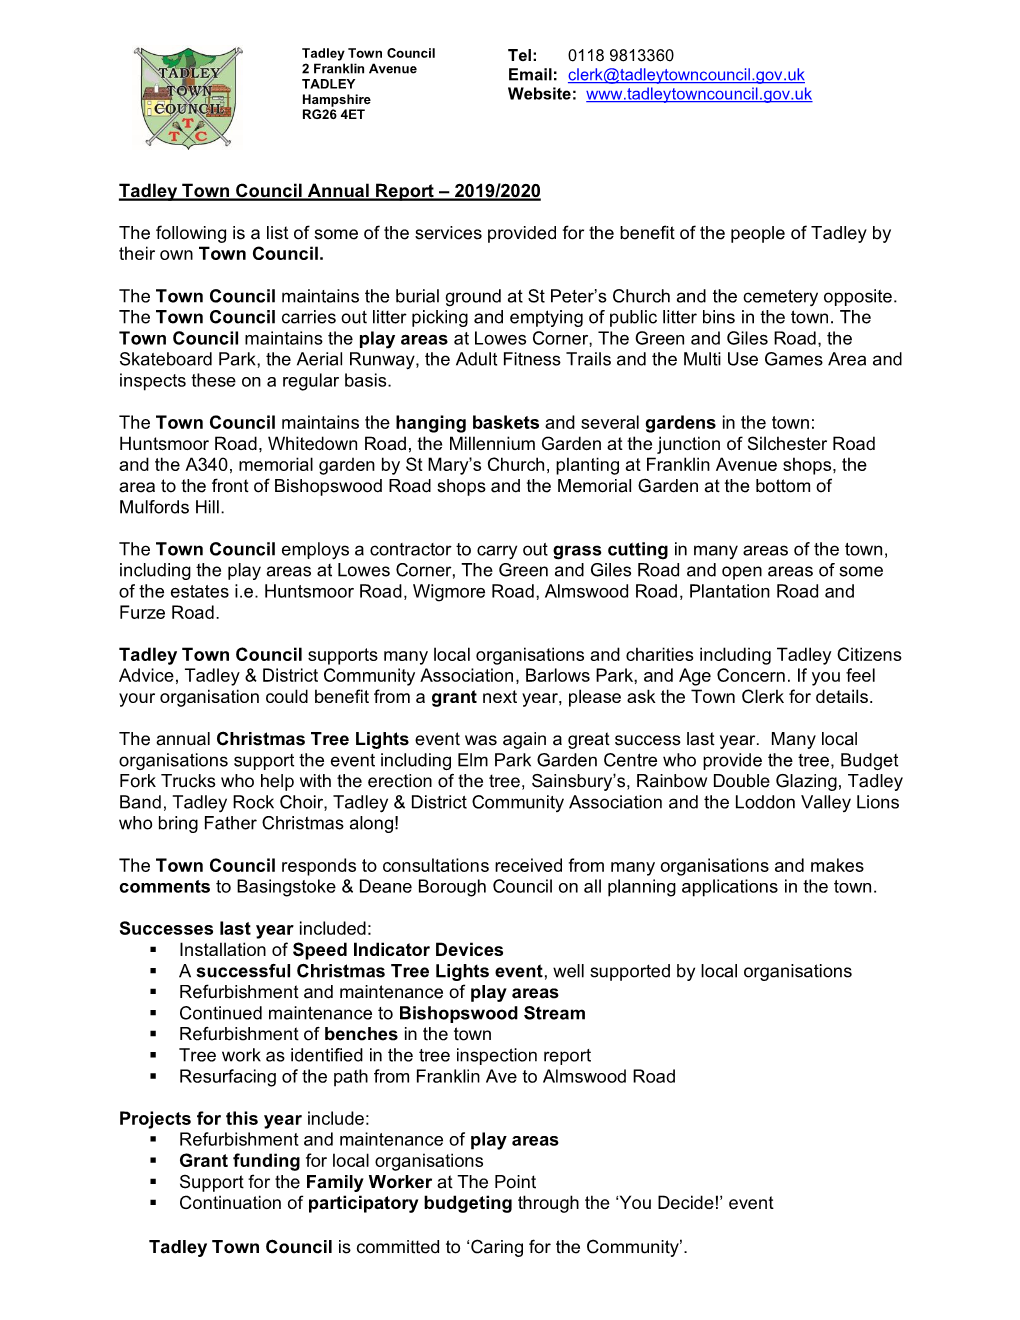 Tadley Town Council Annual Report – 2019/2020 the Following Is a List Of